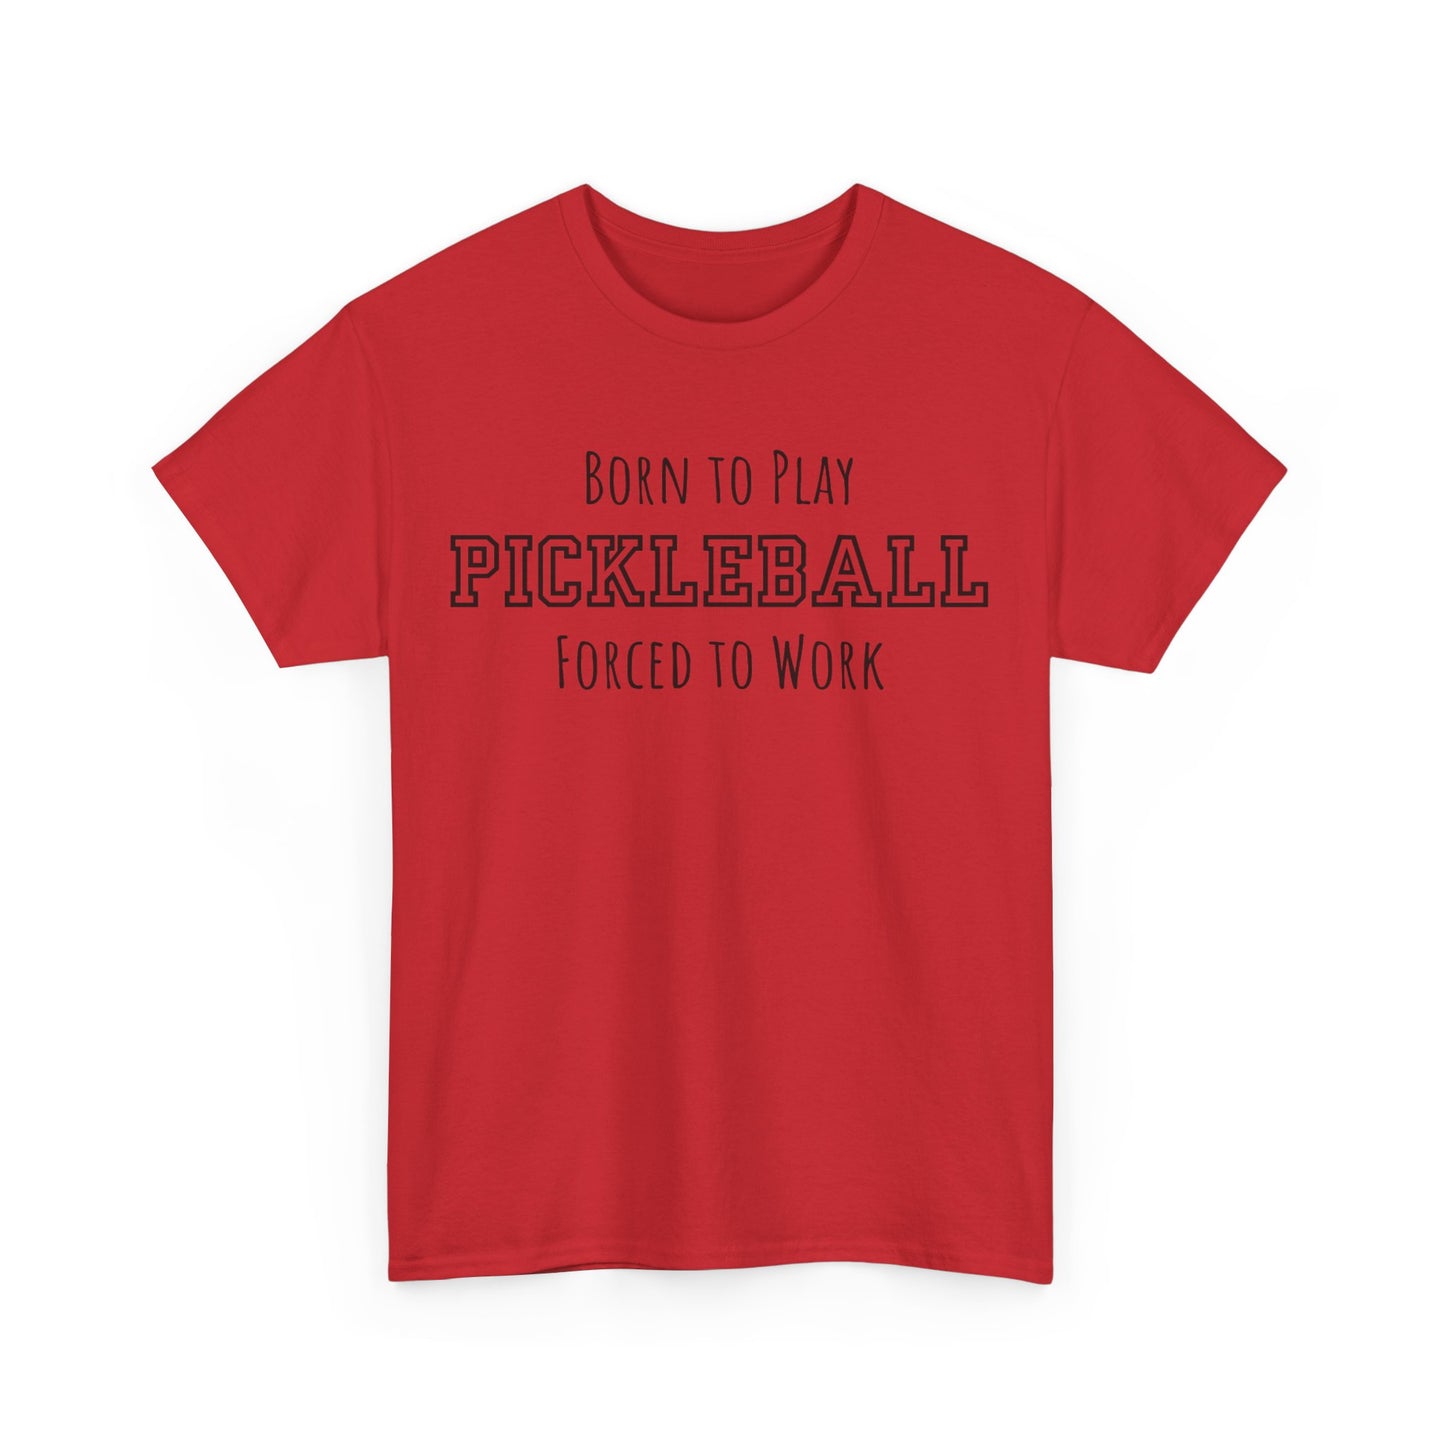 Born to Play Pickleball Forced to Work T-shirt